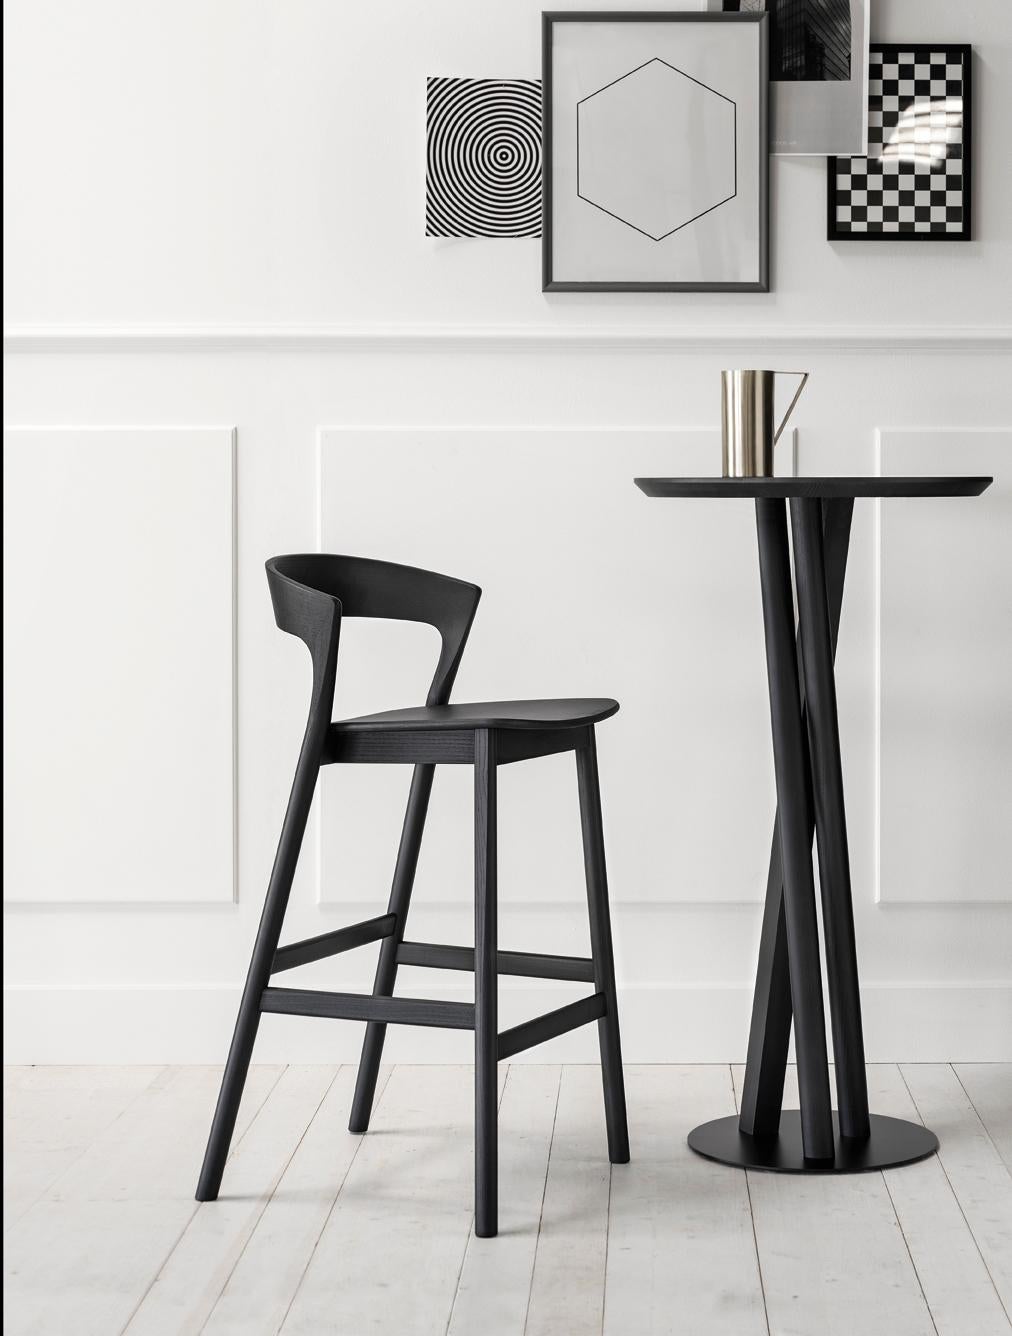 The multifaceted architect and designer, Massimo Broglio, with his cross-cutting style, innovation and pragmatism, has designed the Edith project, which has evolved from a simple chair to an entire collection, encompassing a small table, a coat rack